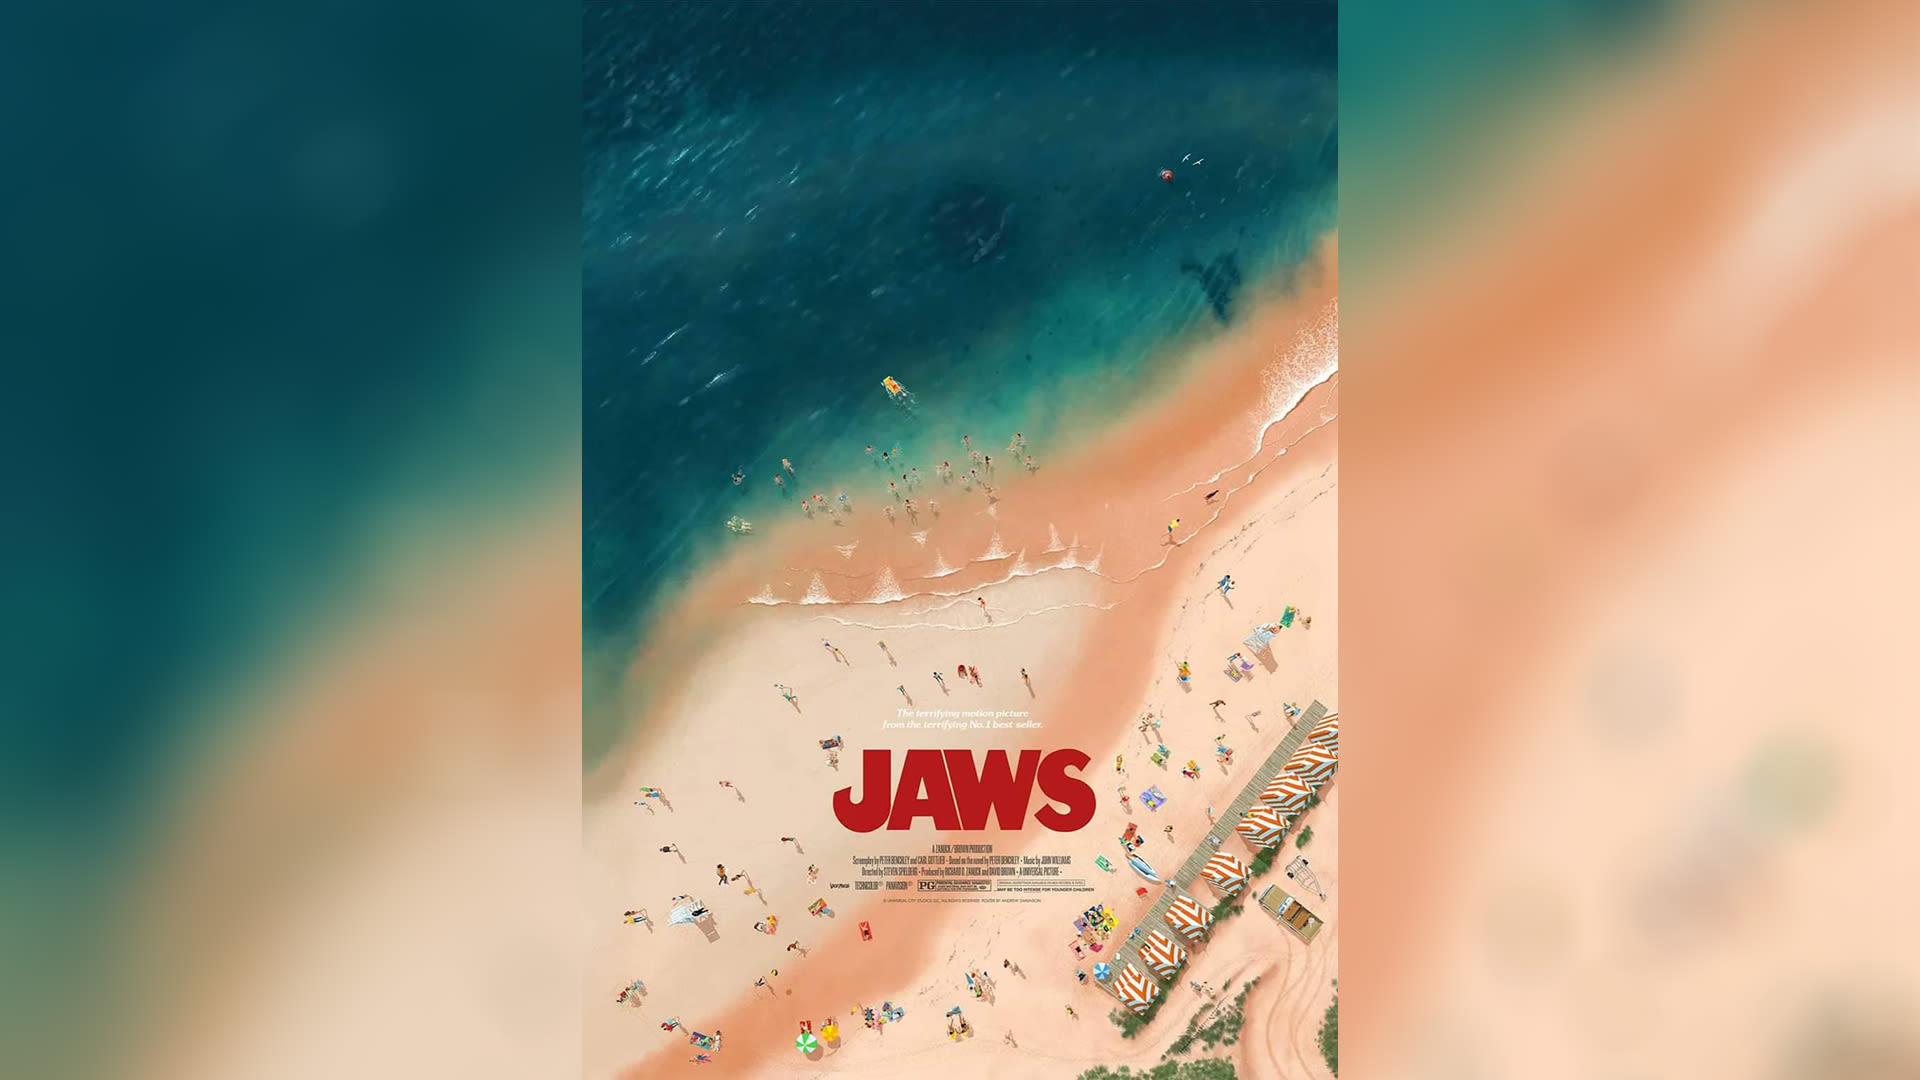 Fans can’t decide how many Jaws easter eggs are in this poster